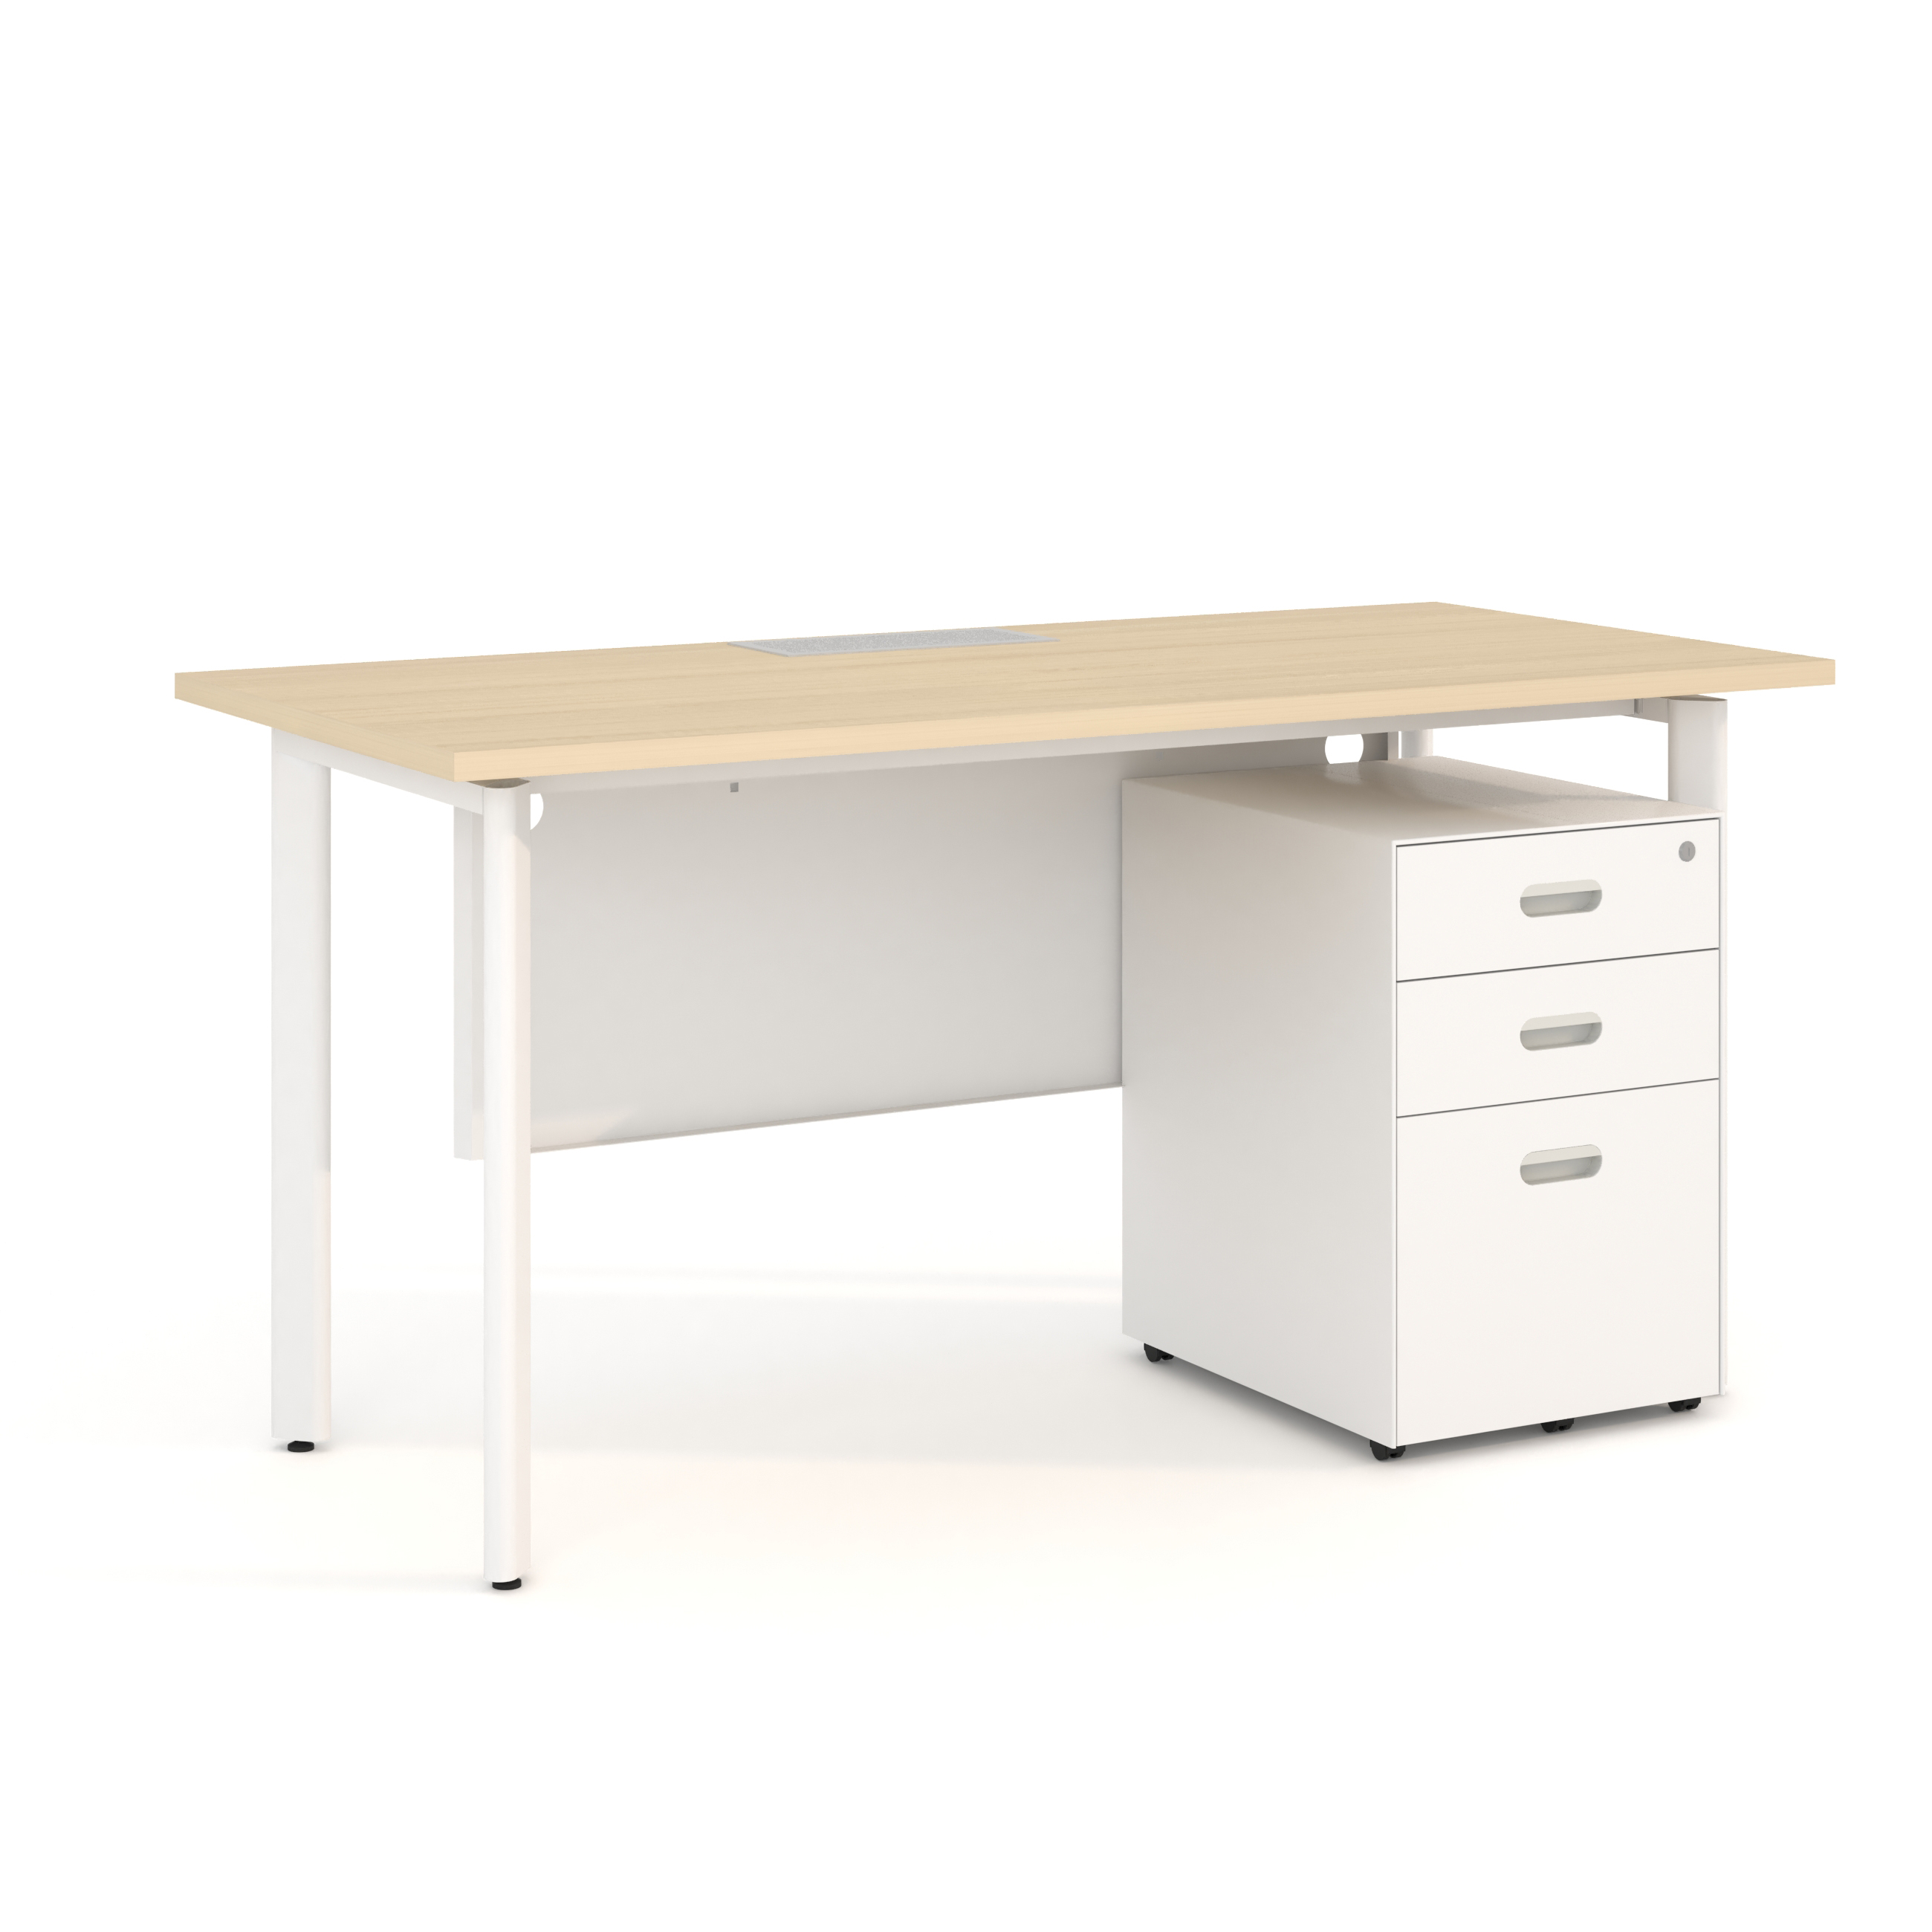 Sleek And Versatile Meeting Table for Conference